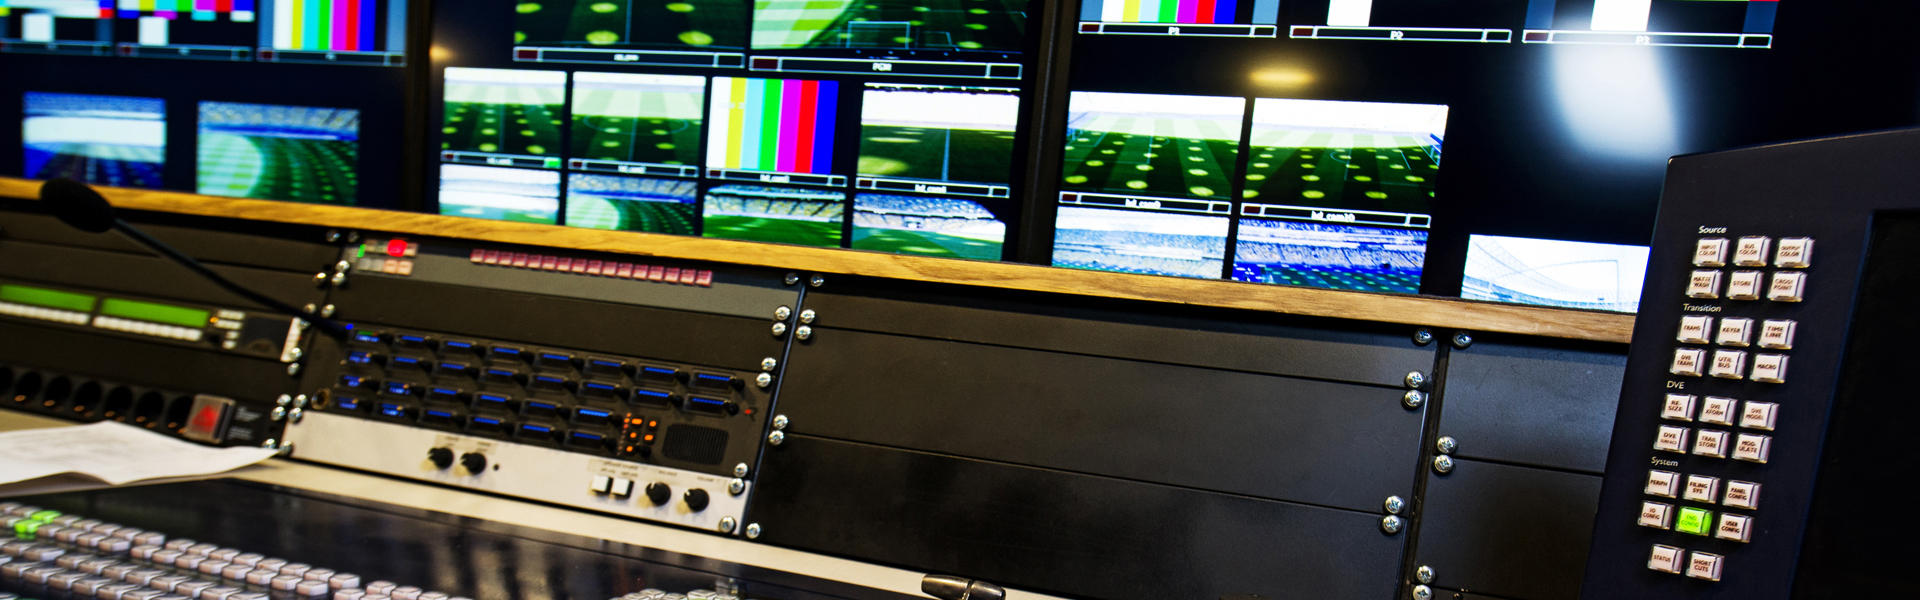 A stock photo of a media broadcasting control room